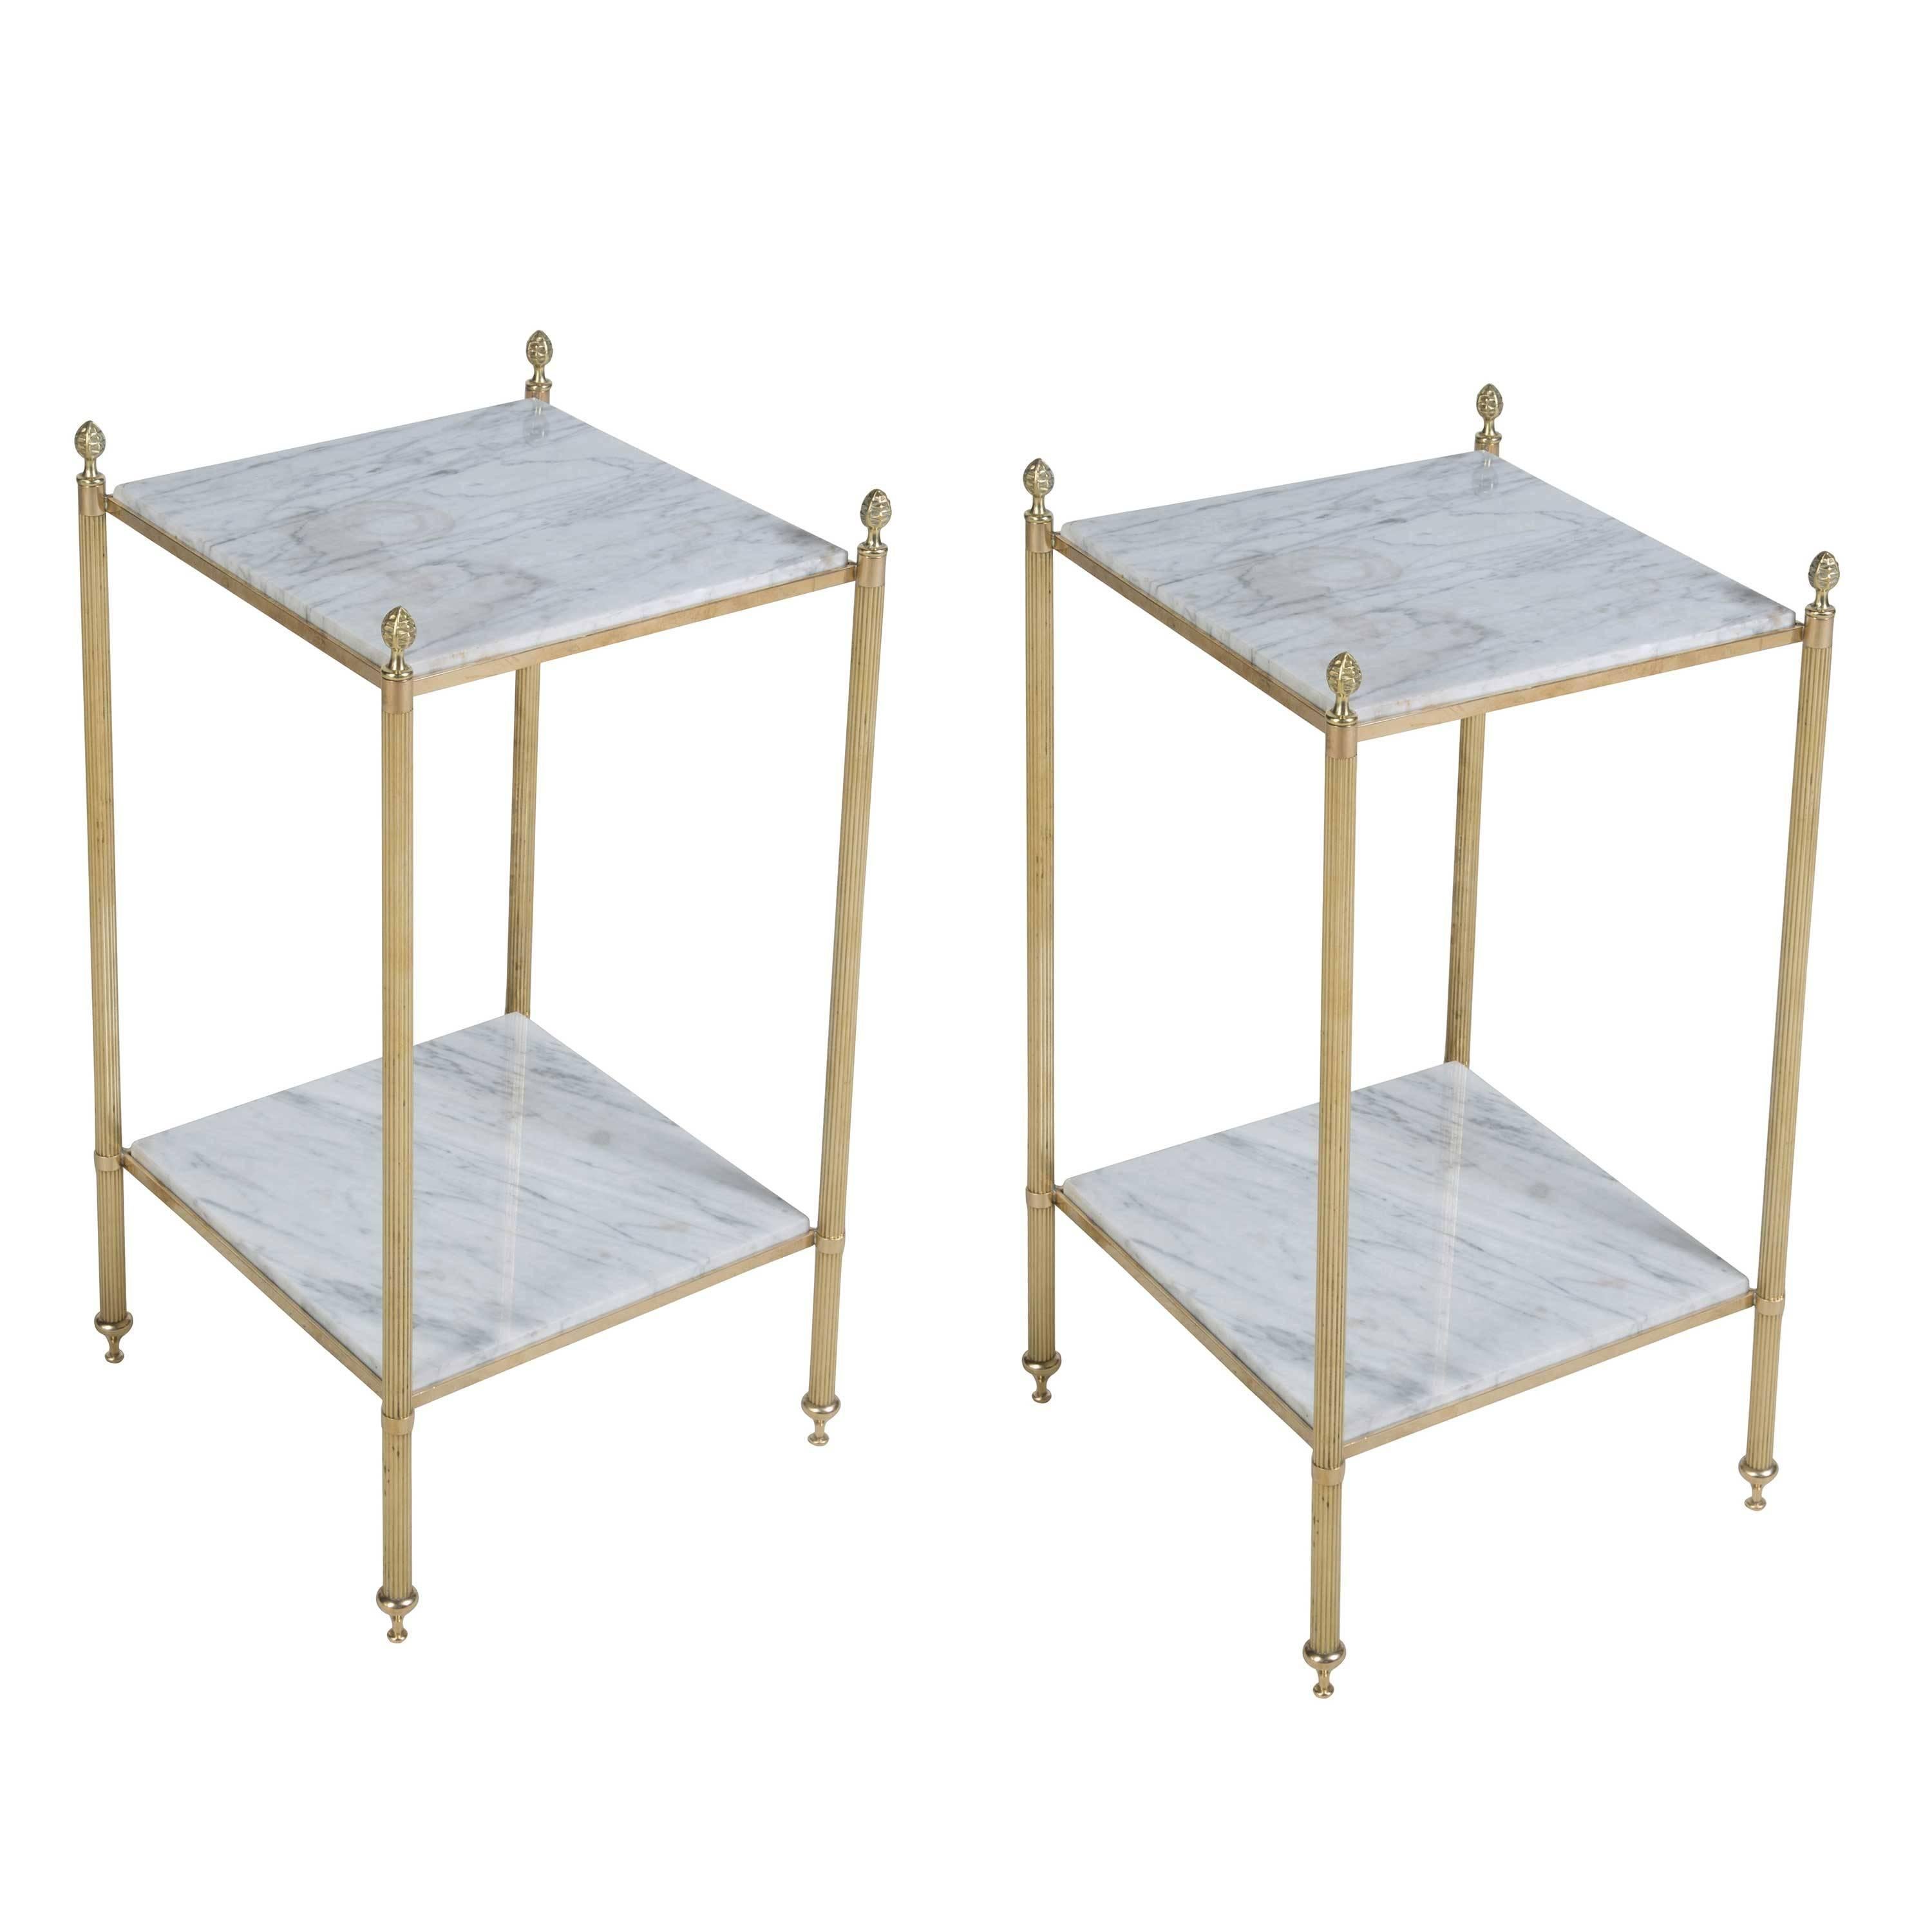 Pair of French 1970s Maison Jansen style brass and marble side tables.